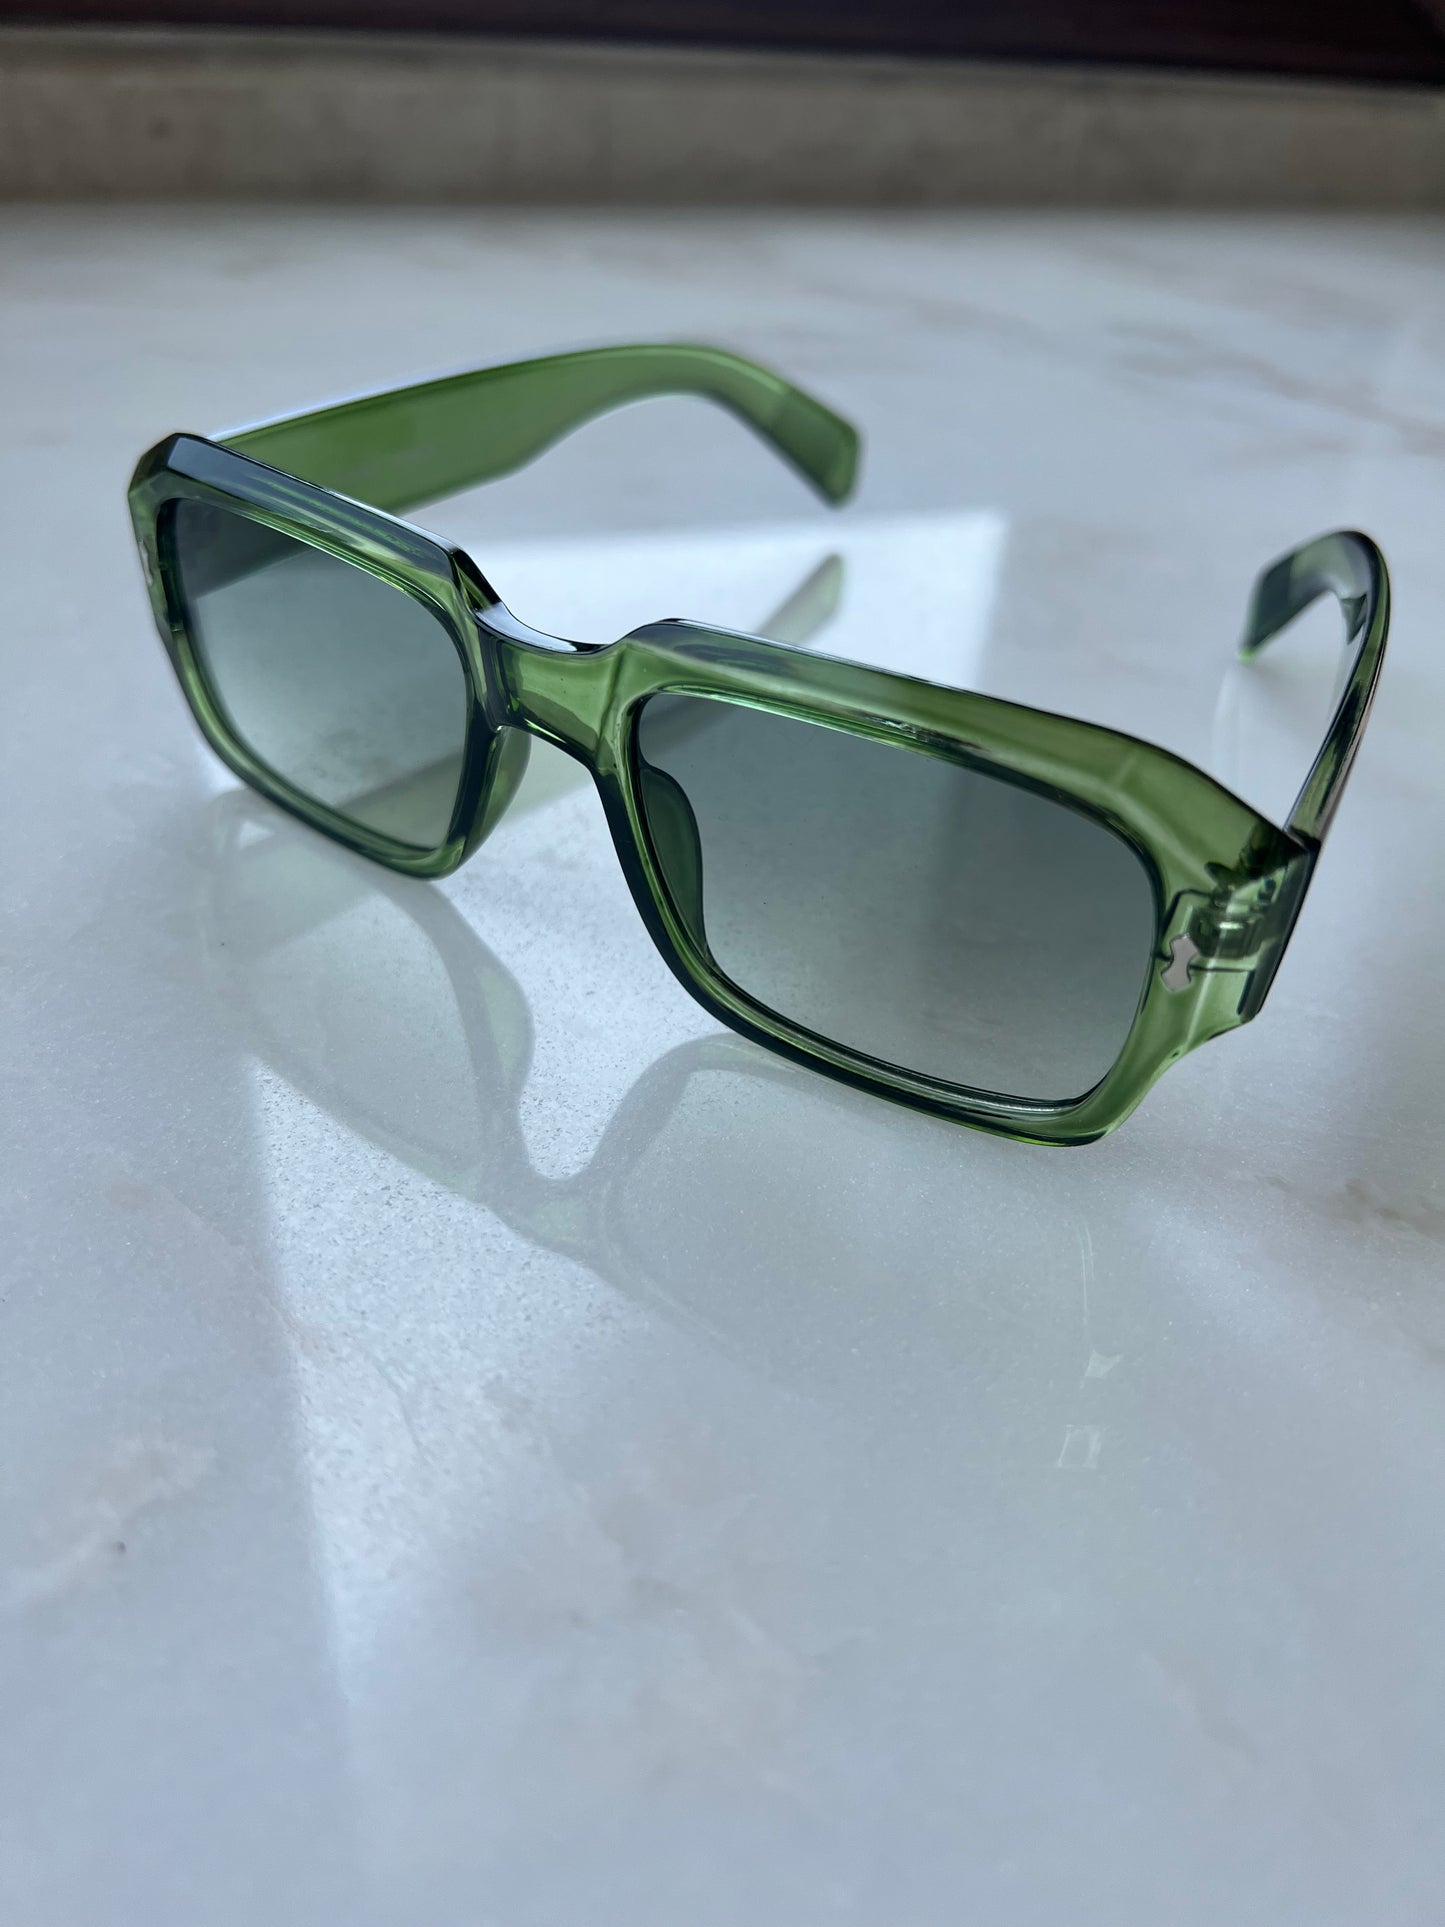 olive view sunglass